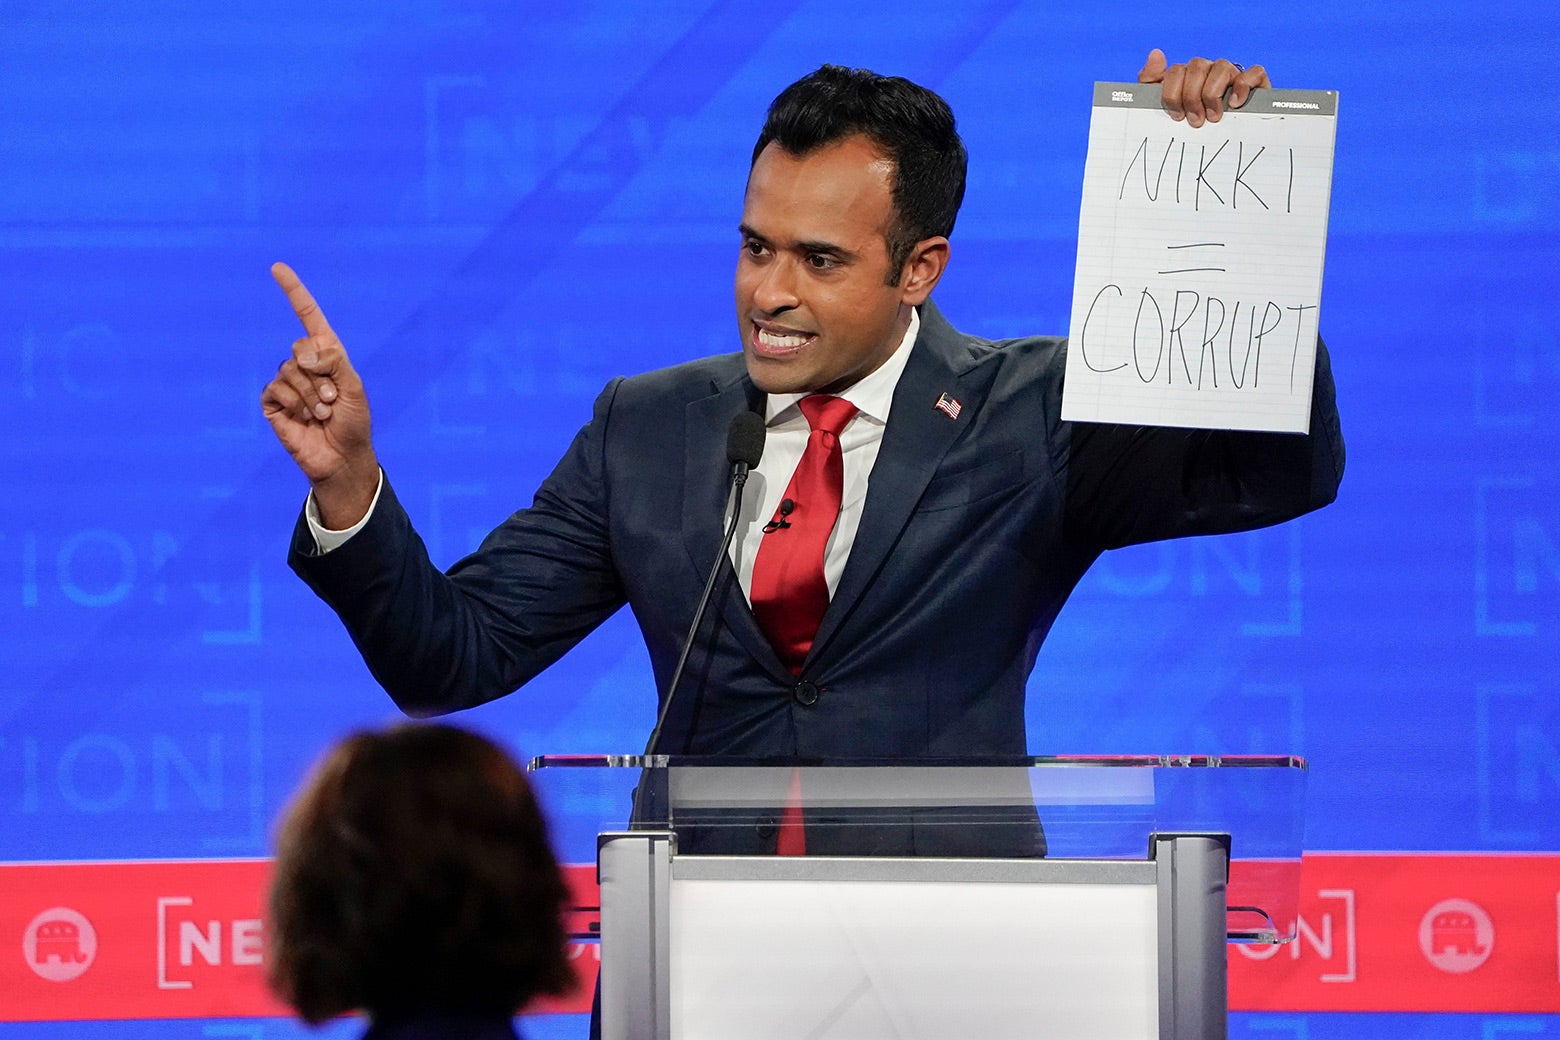 Vivek Ramaswamy Crammed As Many Far-Right Conspiracy Theories As He Could Into the Last GOP Debate Shirin Ali